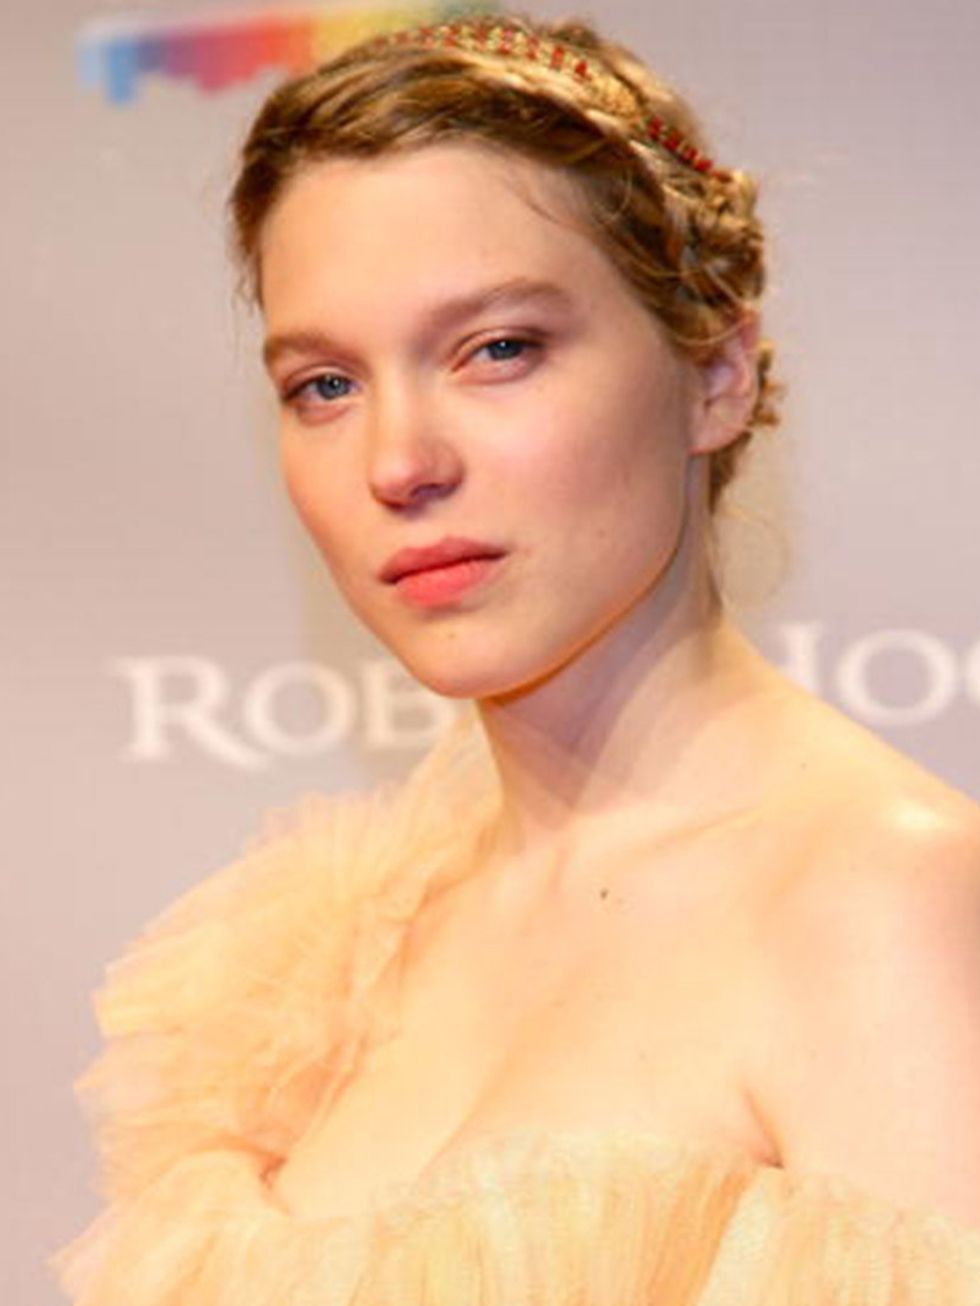 <p>Looking suitably whimsical and fairytale-esque at the Robin Hood after party in Cannes, May 2010</p>